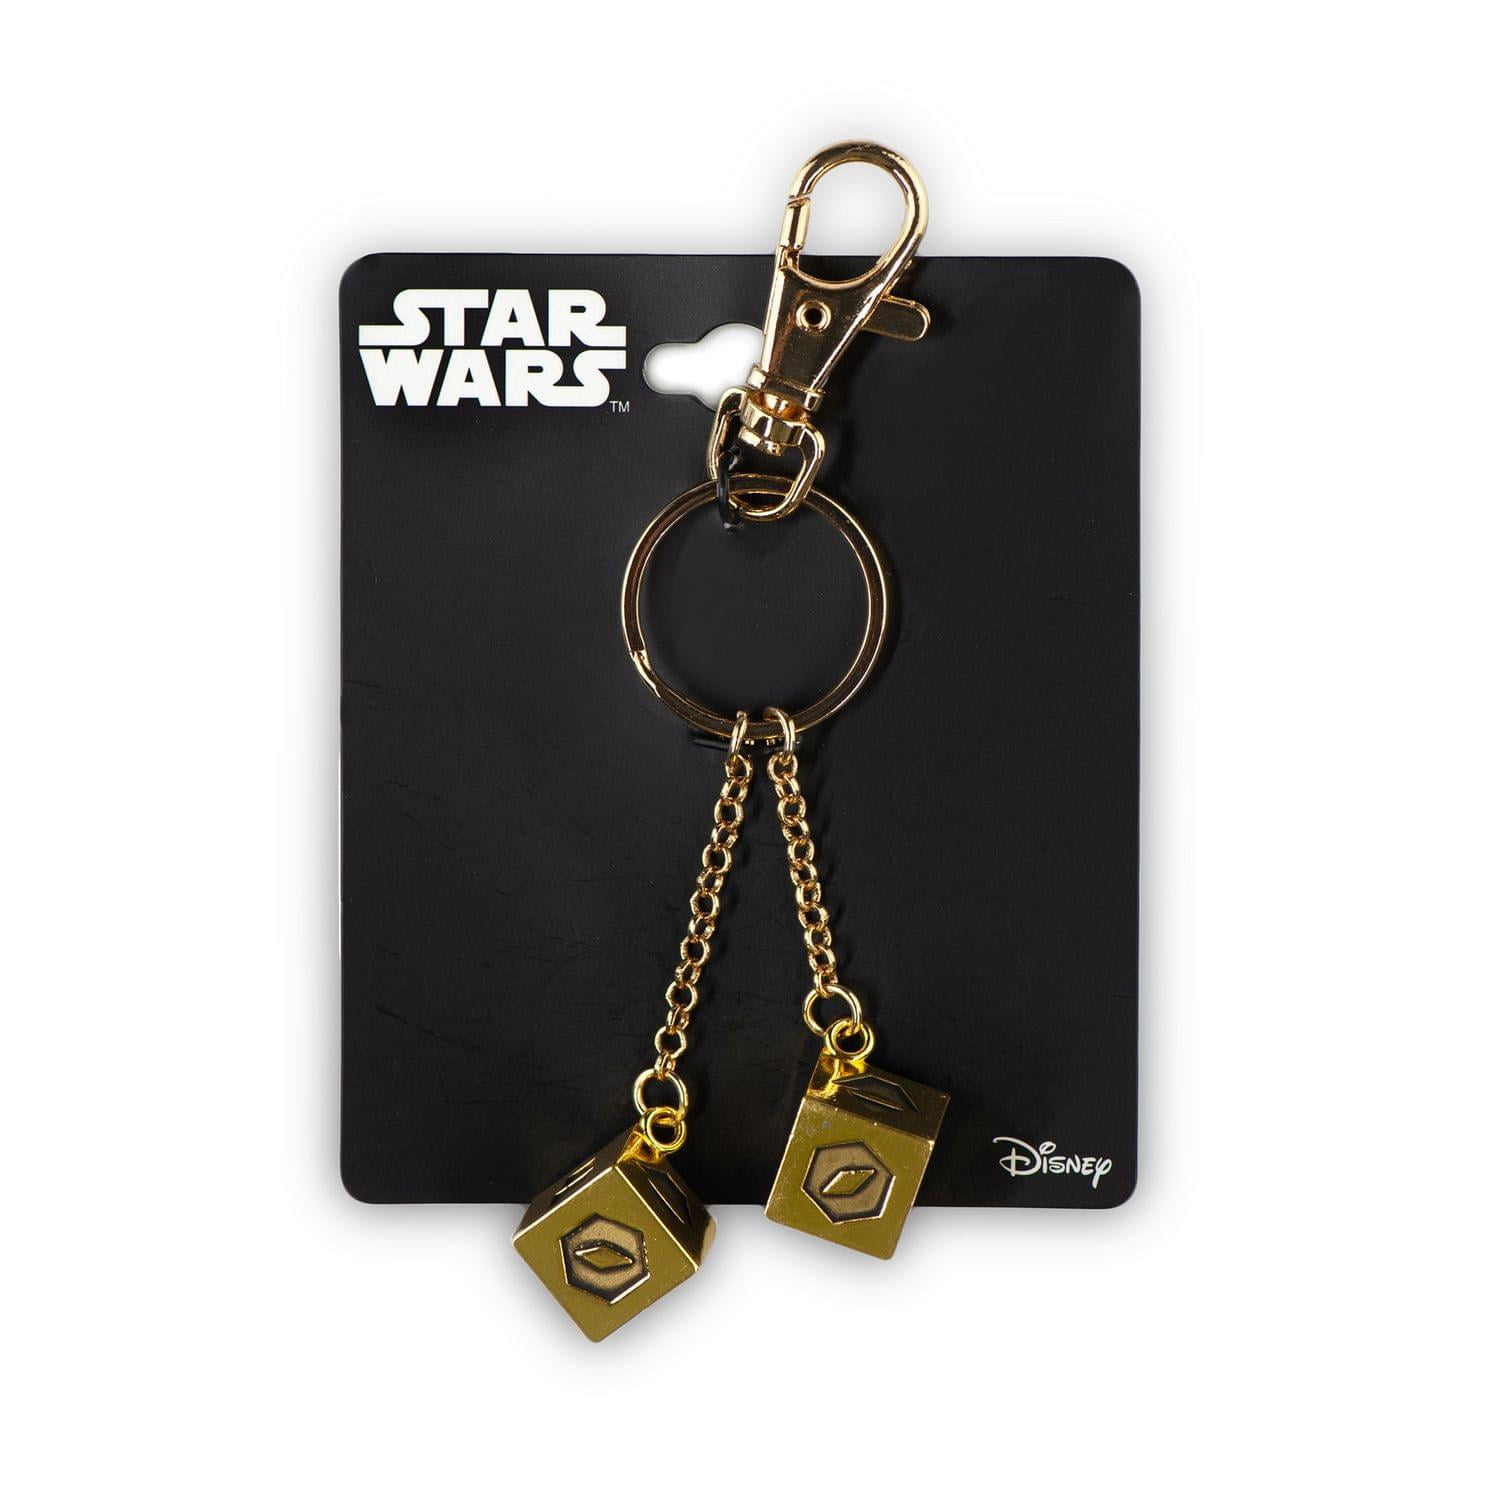 Star Wars Story-Han SOLO Dice Lucky SABACC Dice Millennium Falcon Key Rings Hot 